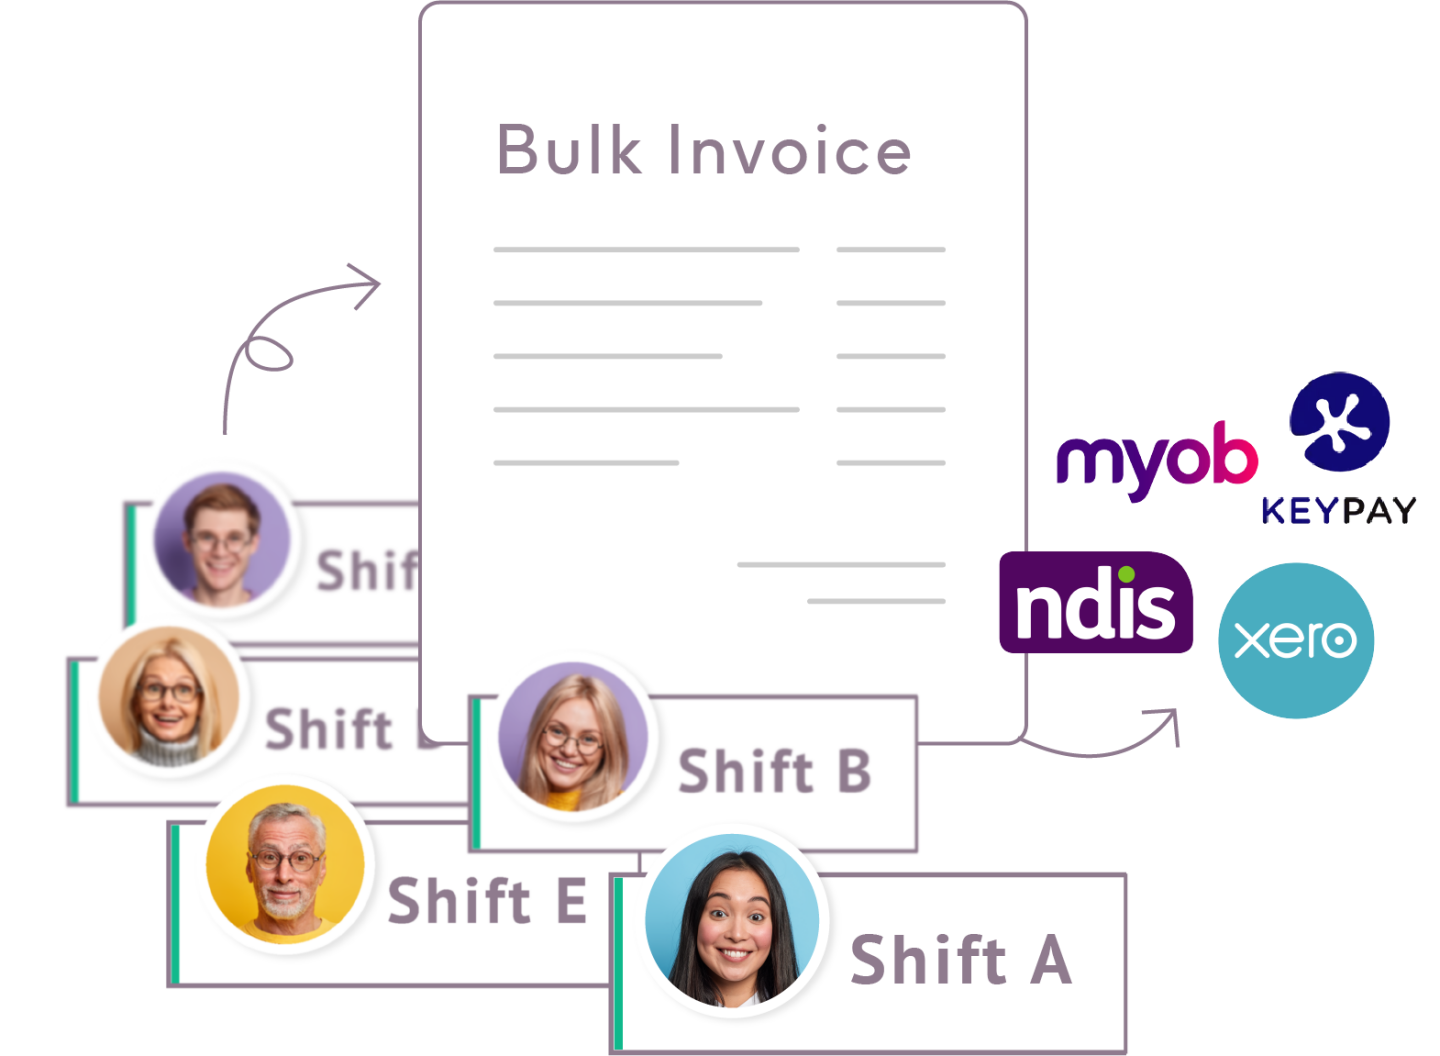 Bulk invoicing function for multiple shifts on ShiftCare with integrated accounting software like MYOB, KeyPay, NDIS, and Xero